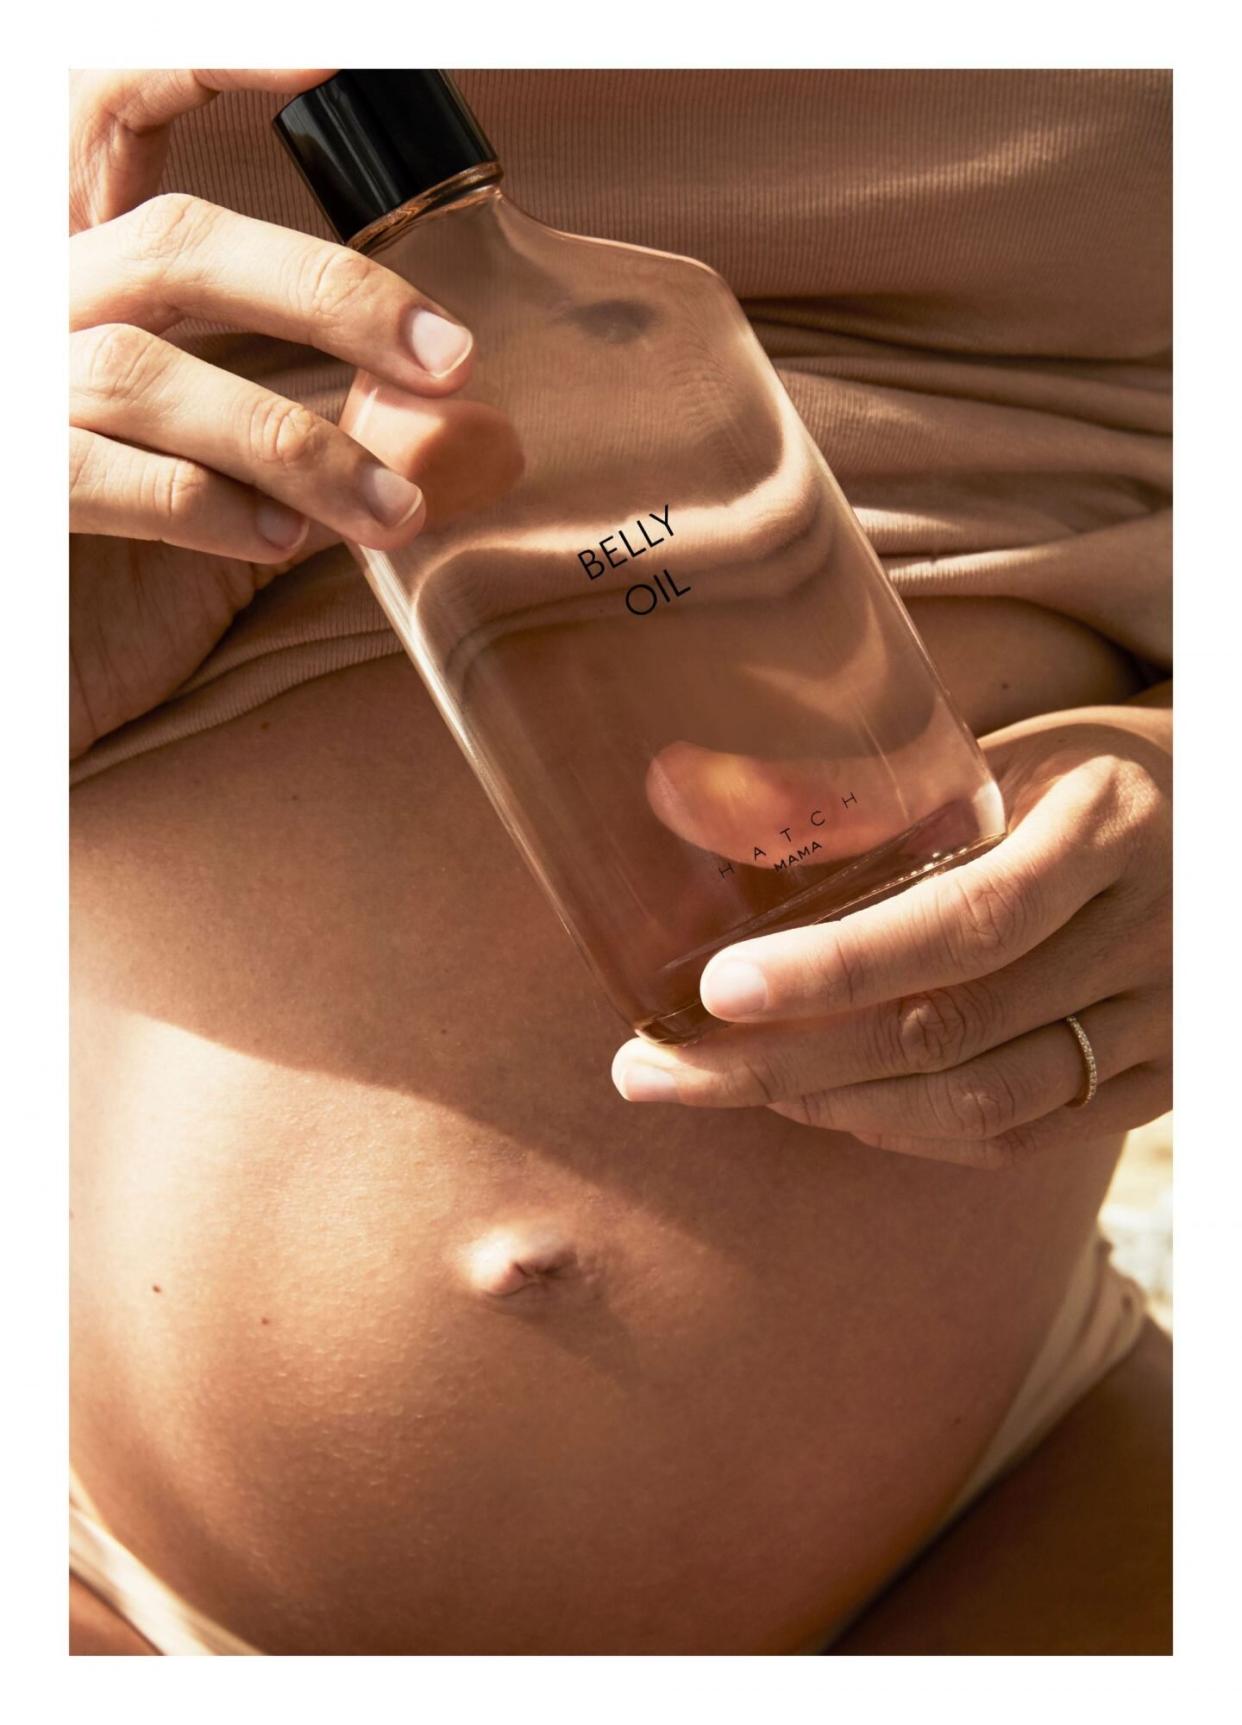 This Celeb-Loved Stretch Mark Oil Is on Sale for the First Time Ever